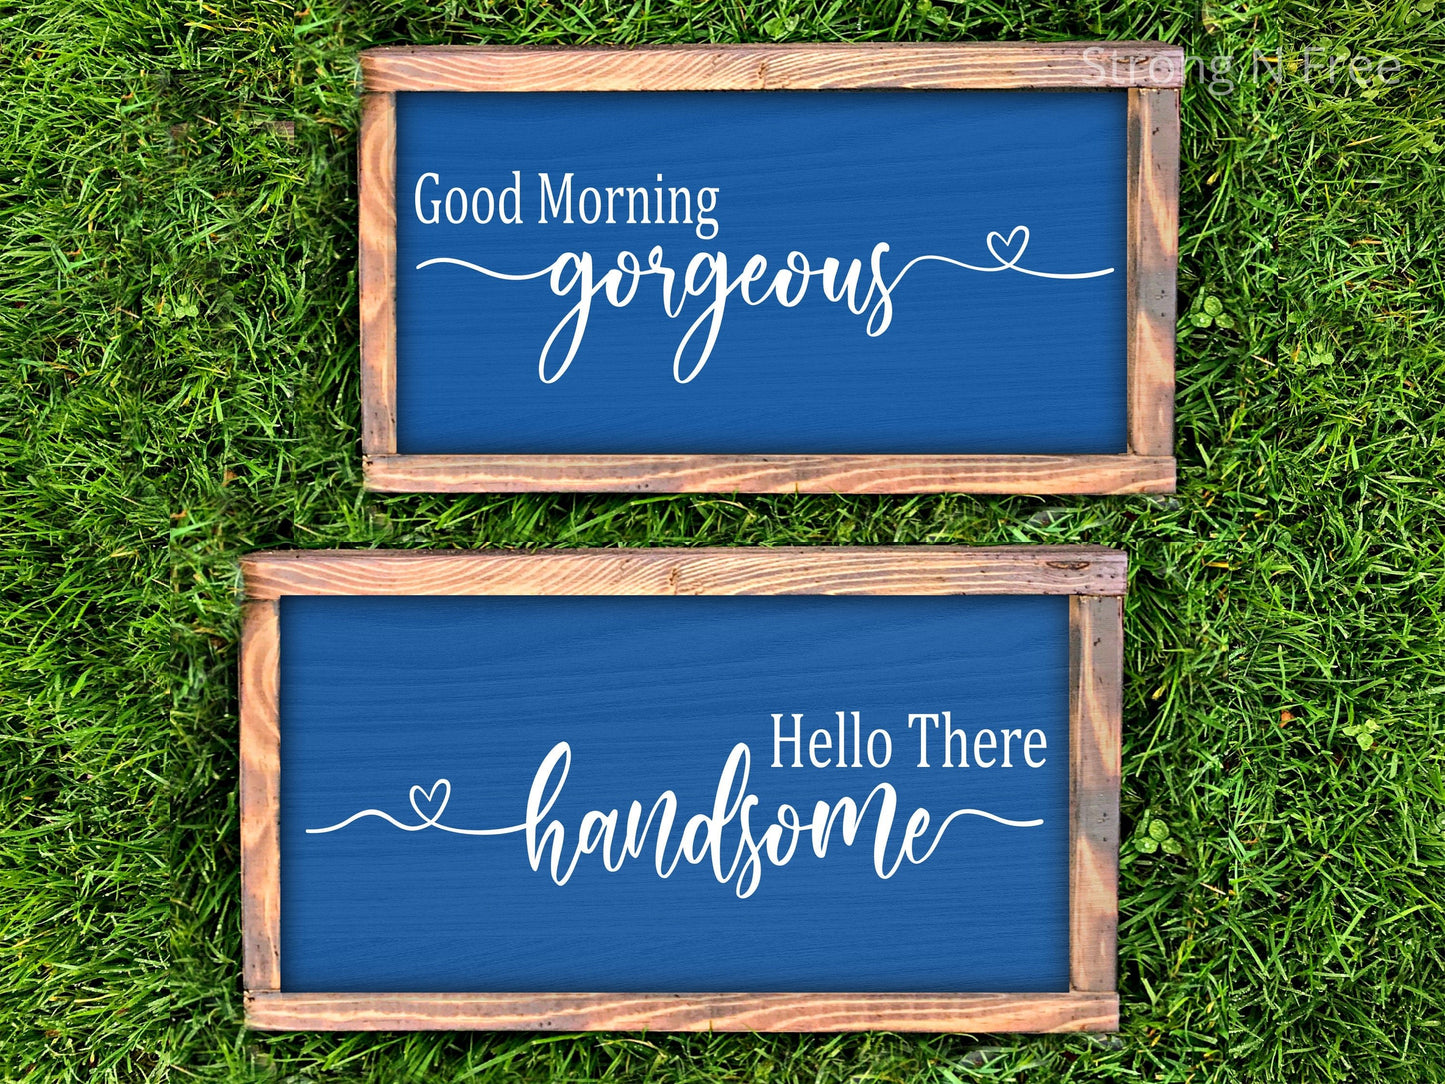 Hello Handsome Good Morning Gorgeous sign set - Good Morning Gorgeous Hello Handsome - Kitchen Signs - Wood Signs - Laundry Sign - Wood Sign